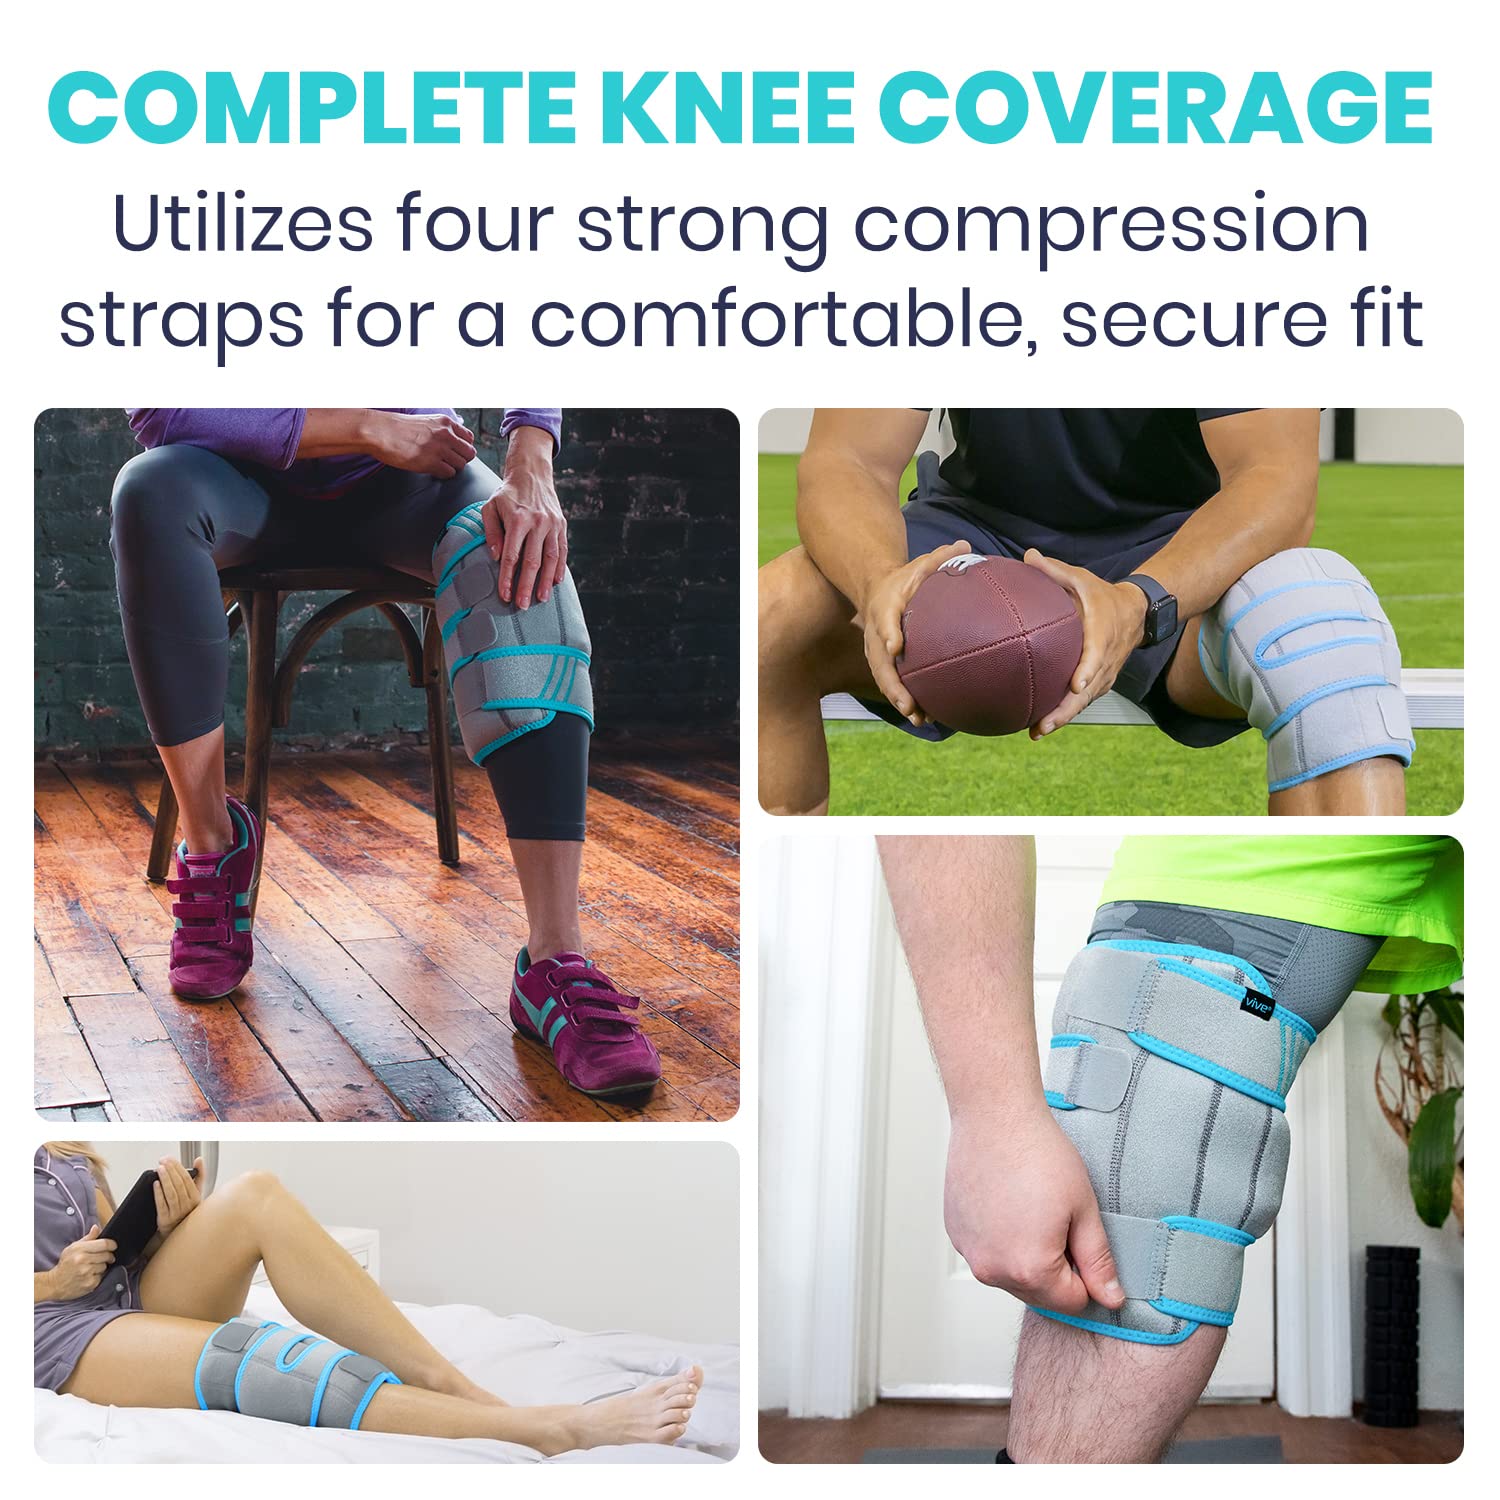 Vive Knee Ice Pack Wrap - Cold/Hot Gel Compression Brace - Heat Support Strap for Arthritis Pain, Tendonitis, ACL, Athletic Injury, Osteoarthritis, Women, Men, Running, Meniscus and Patella Surgery